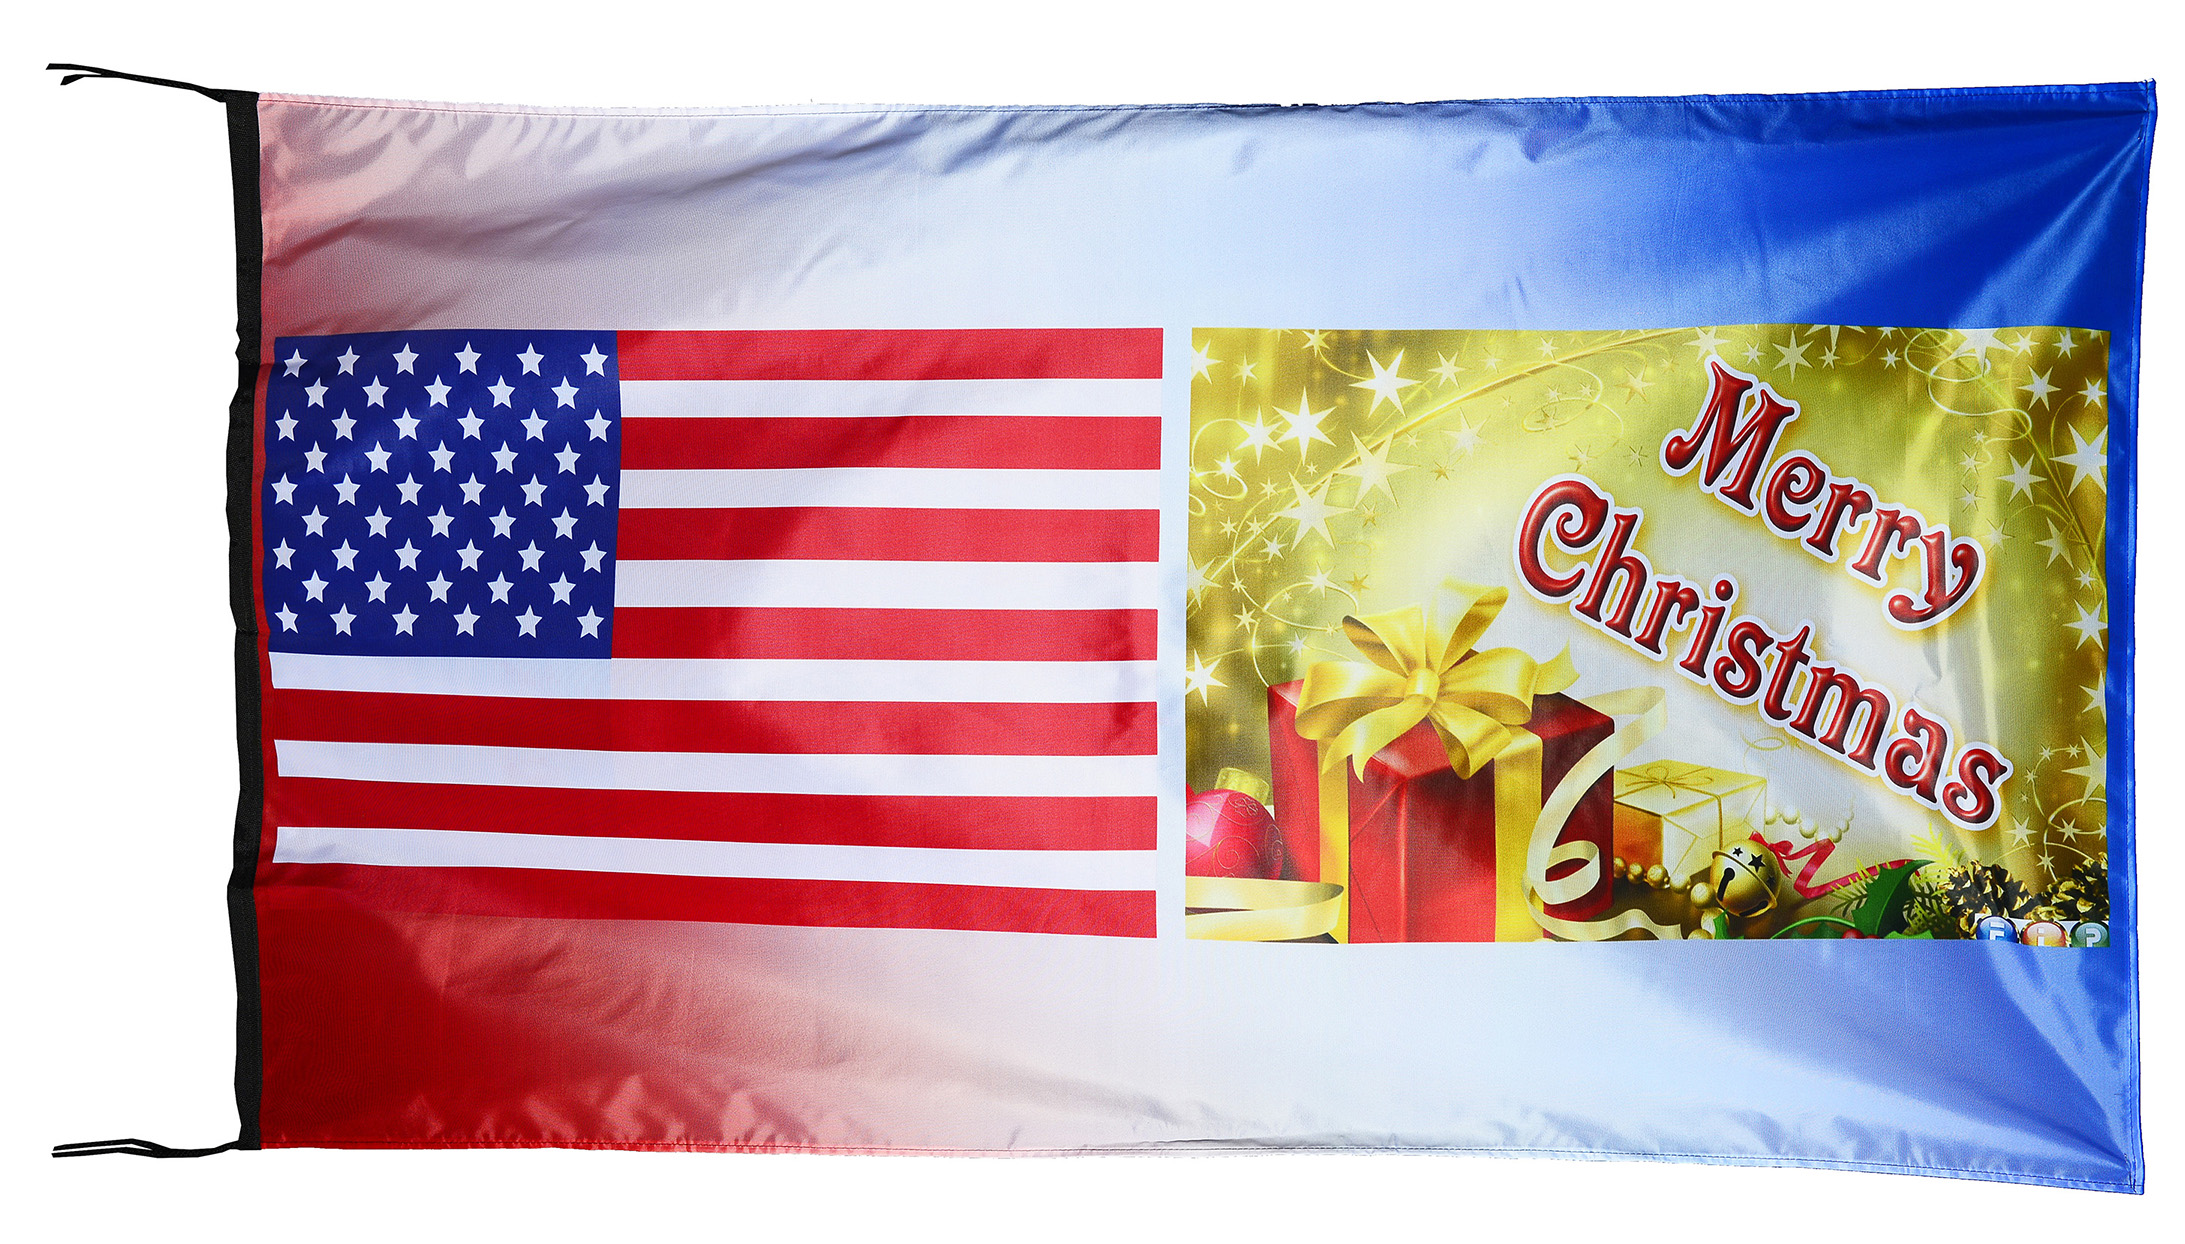 Flag  037 USA / US Country / United States Of America and Happy Xmas Merry Xmas / Christmas / Hollidays / Santa / Winter / Snow / Patriotic / Pride Hybrid Weather-Resistant Polyester Outdoor Flag Landscape Banner / Vivid Colors / 3 X 5 FT (150 x 90cm) International Flags for Sale